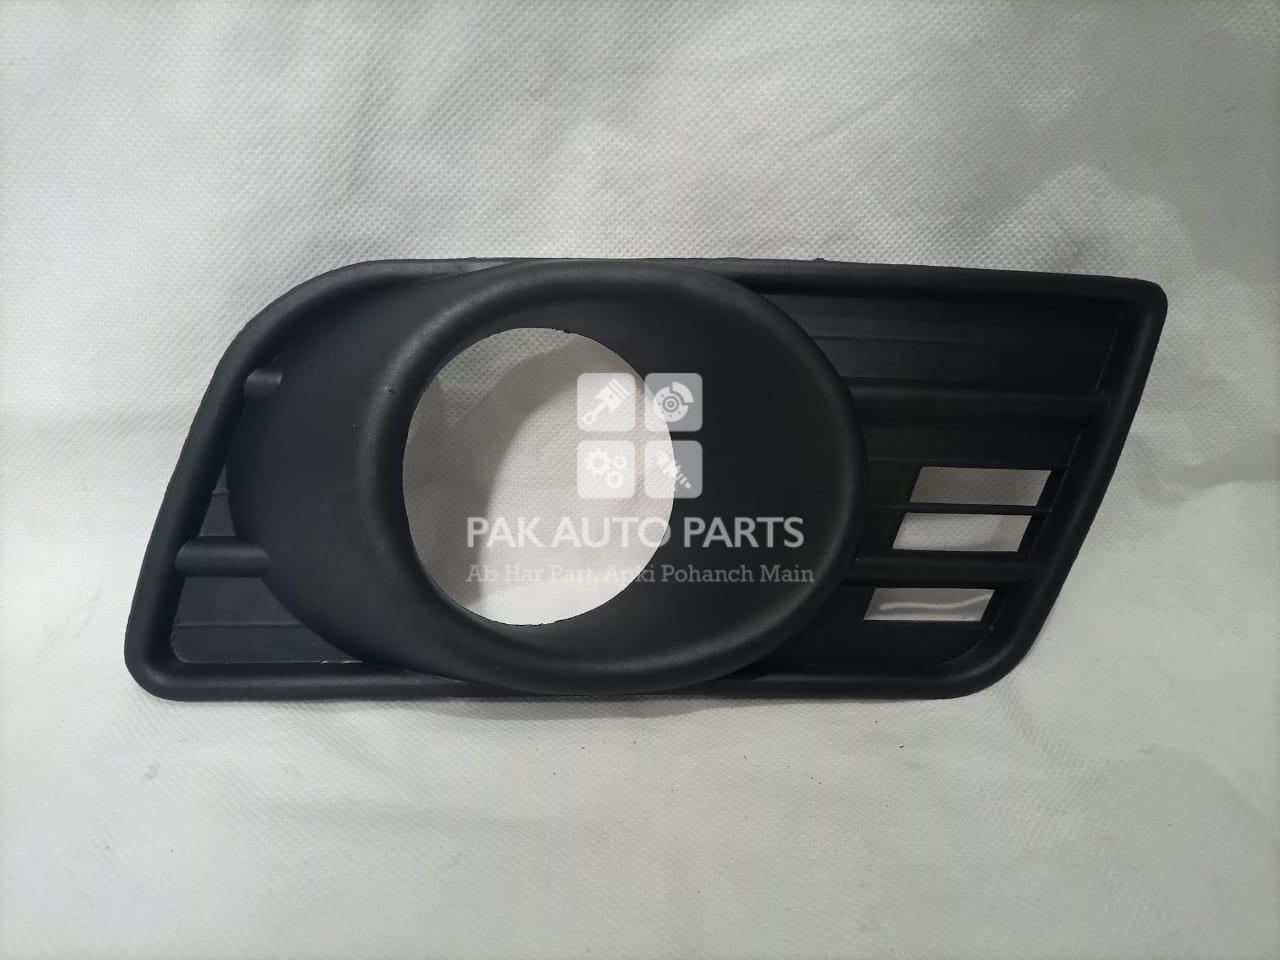 Picture of Suzuki Swift 2009-20 Fog Light Cover With Light Hole